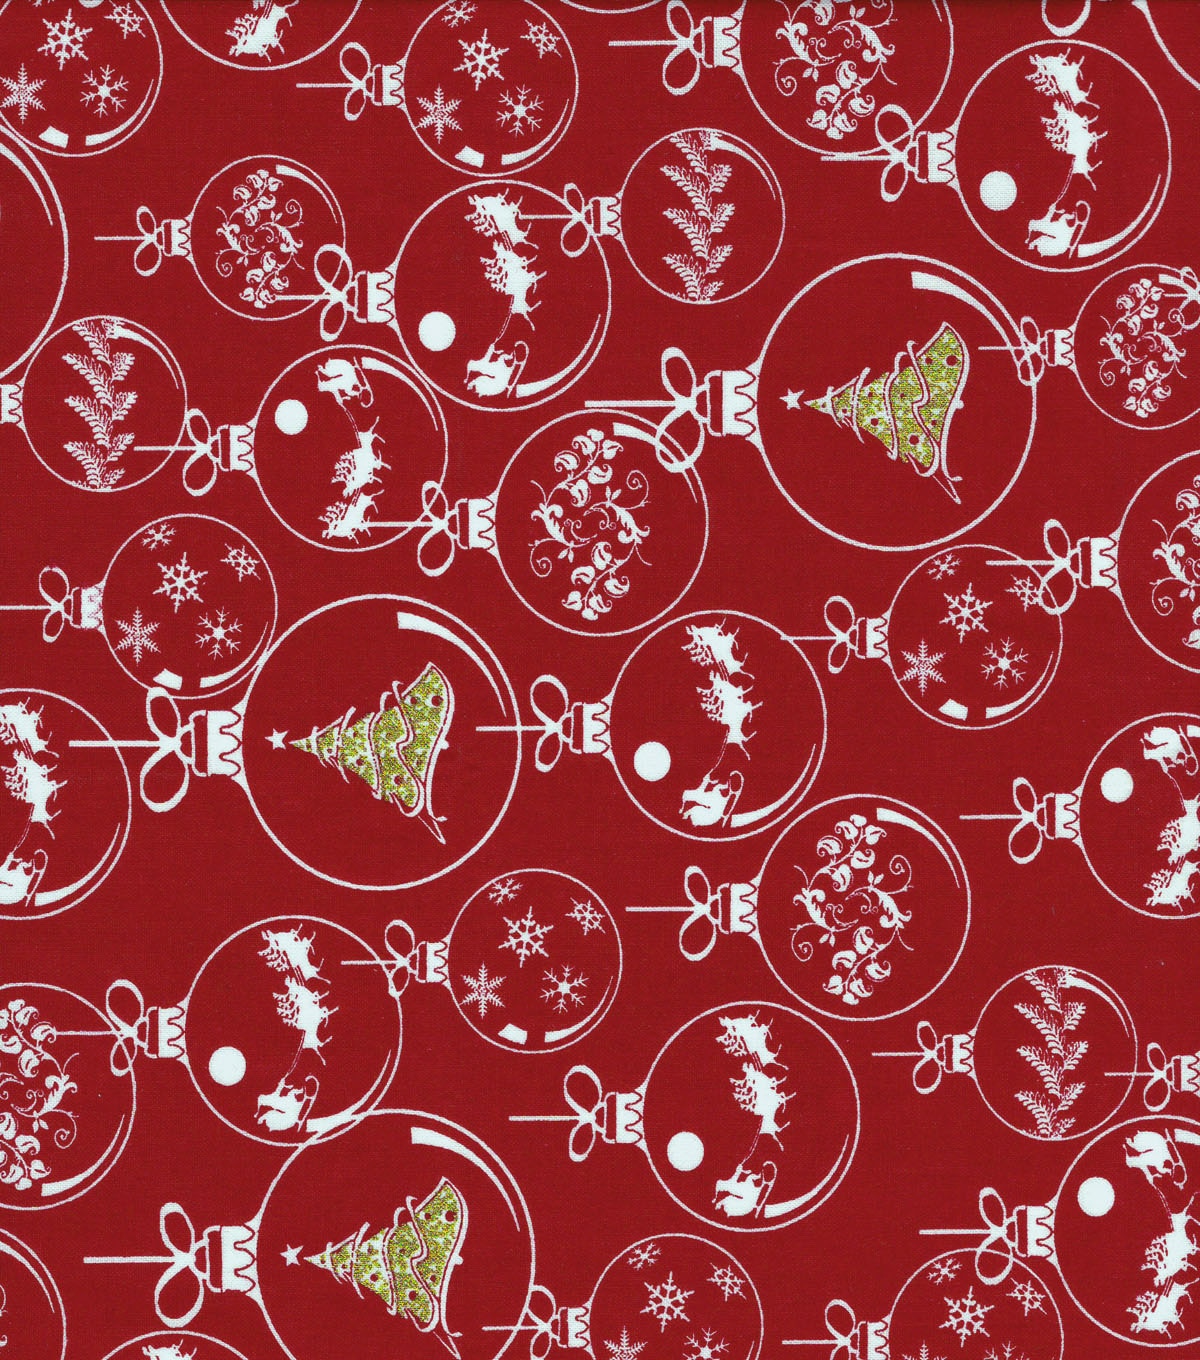 Christmas Cotton Fabric Ornaments on Red | JOANN